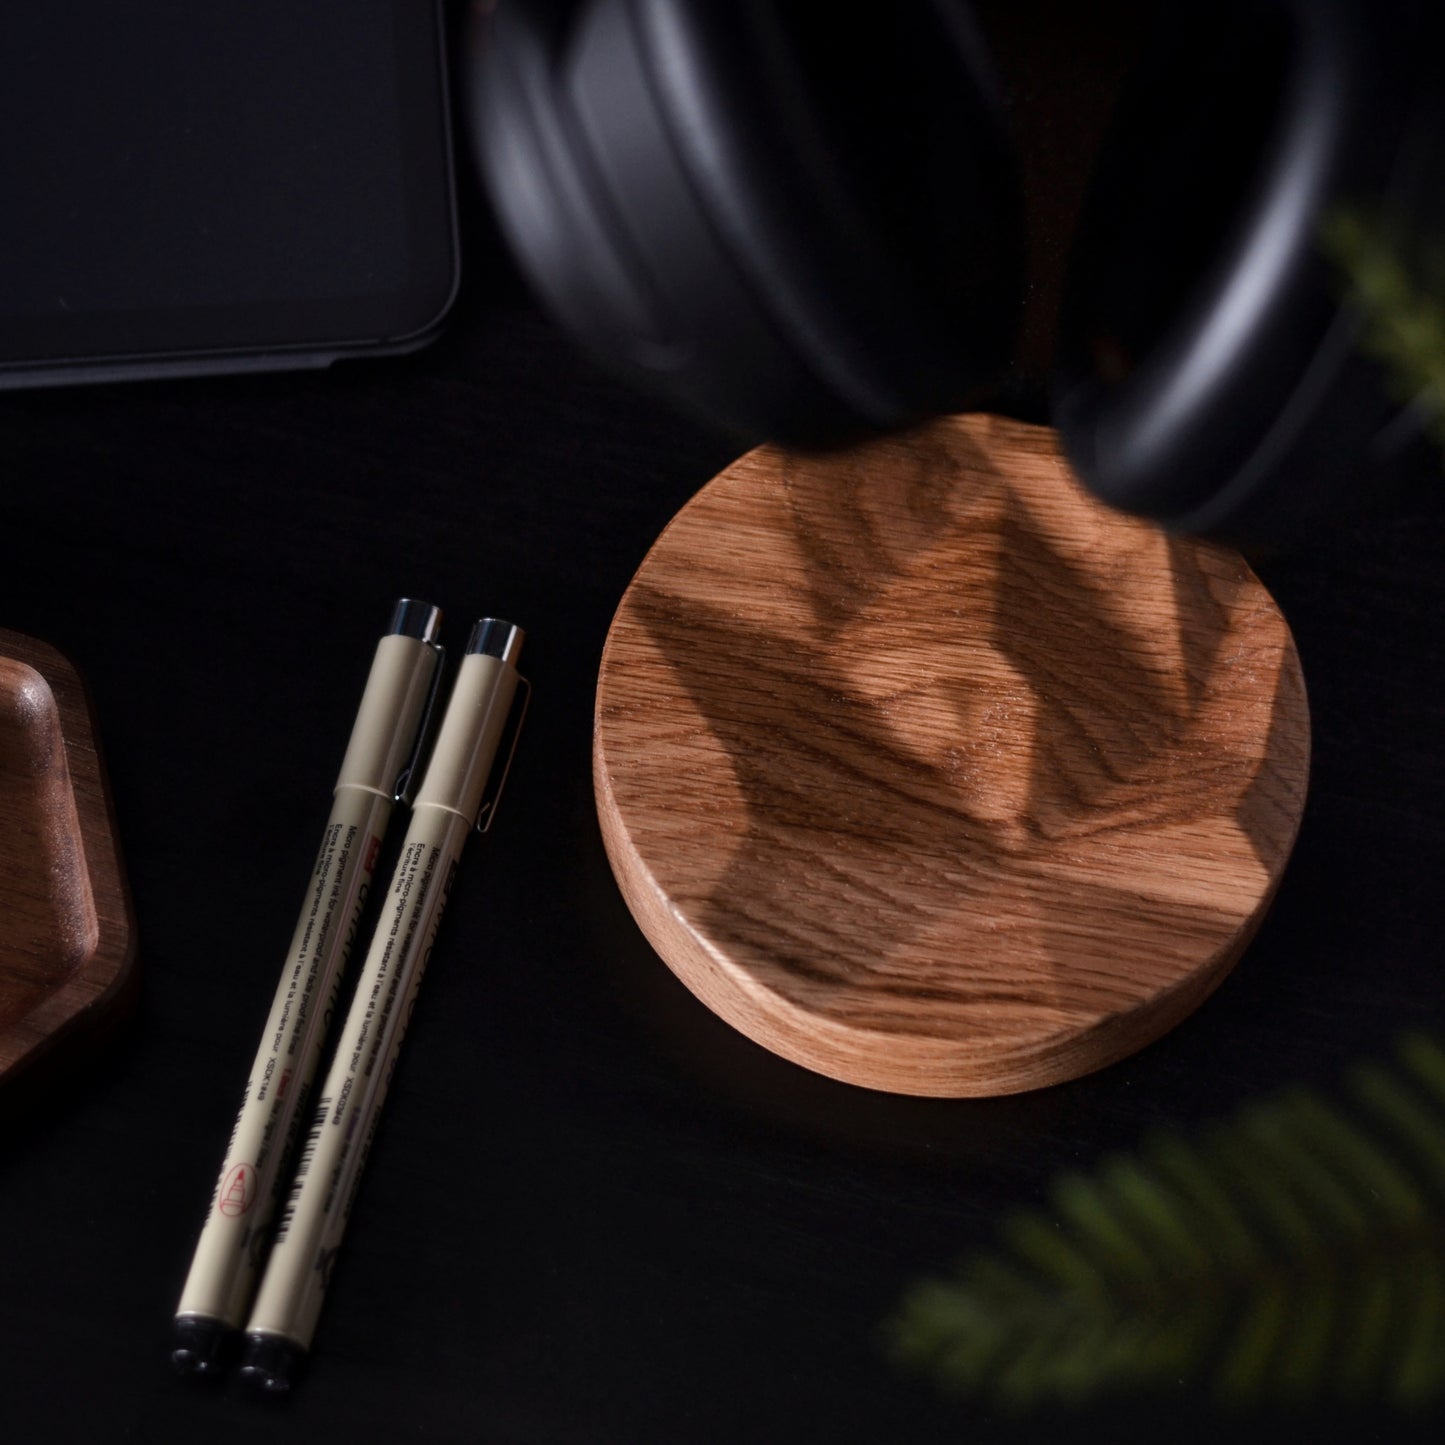 Facet Headphone Stand